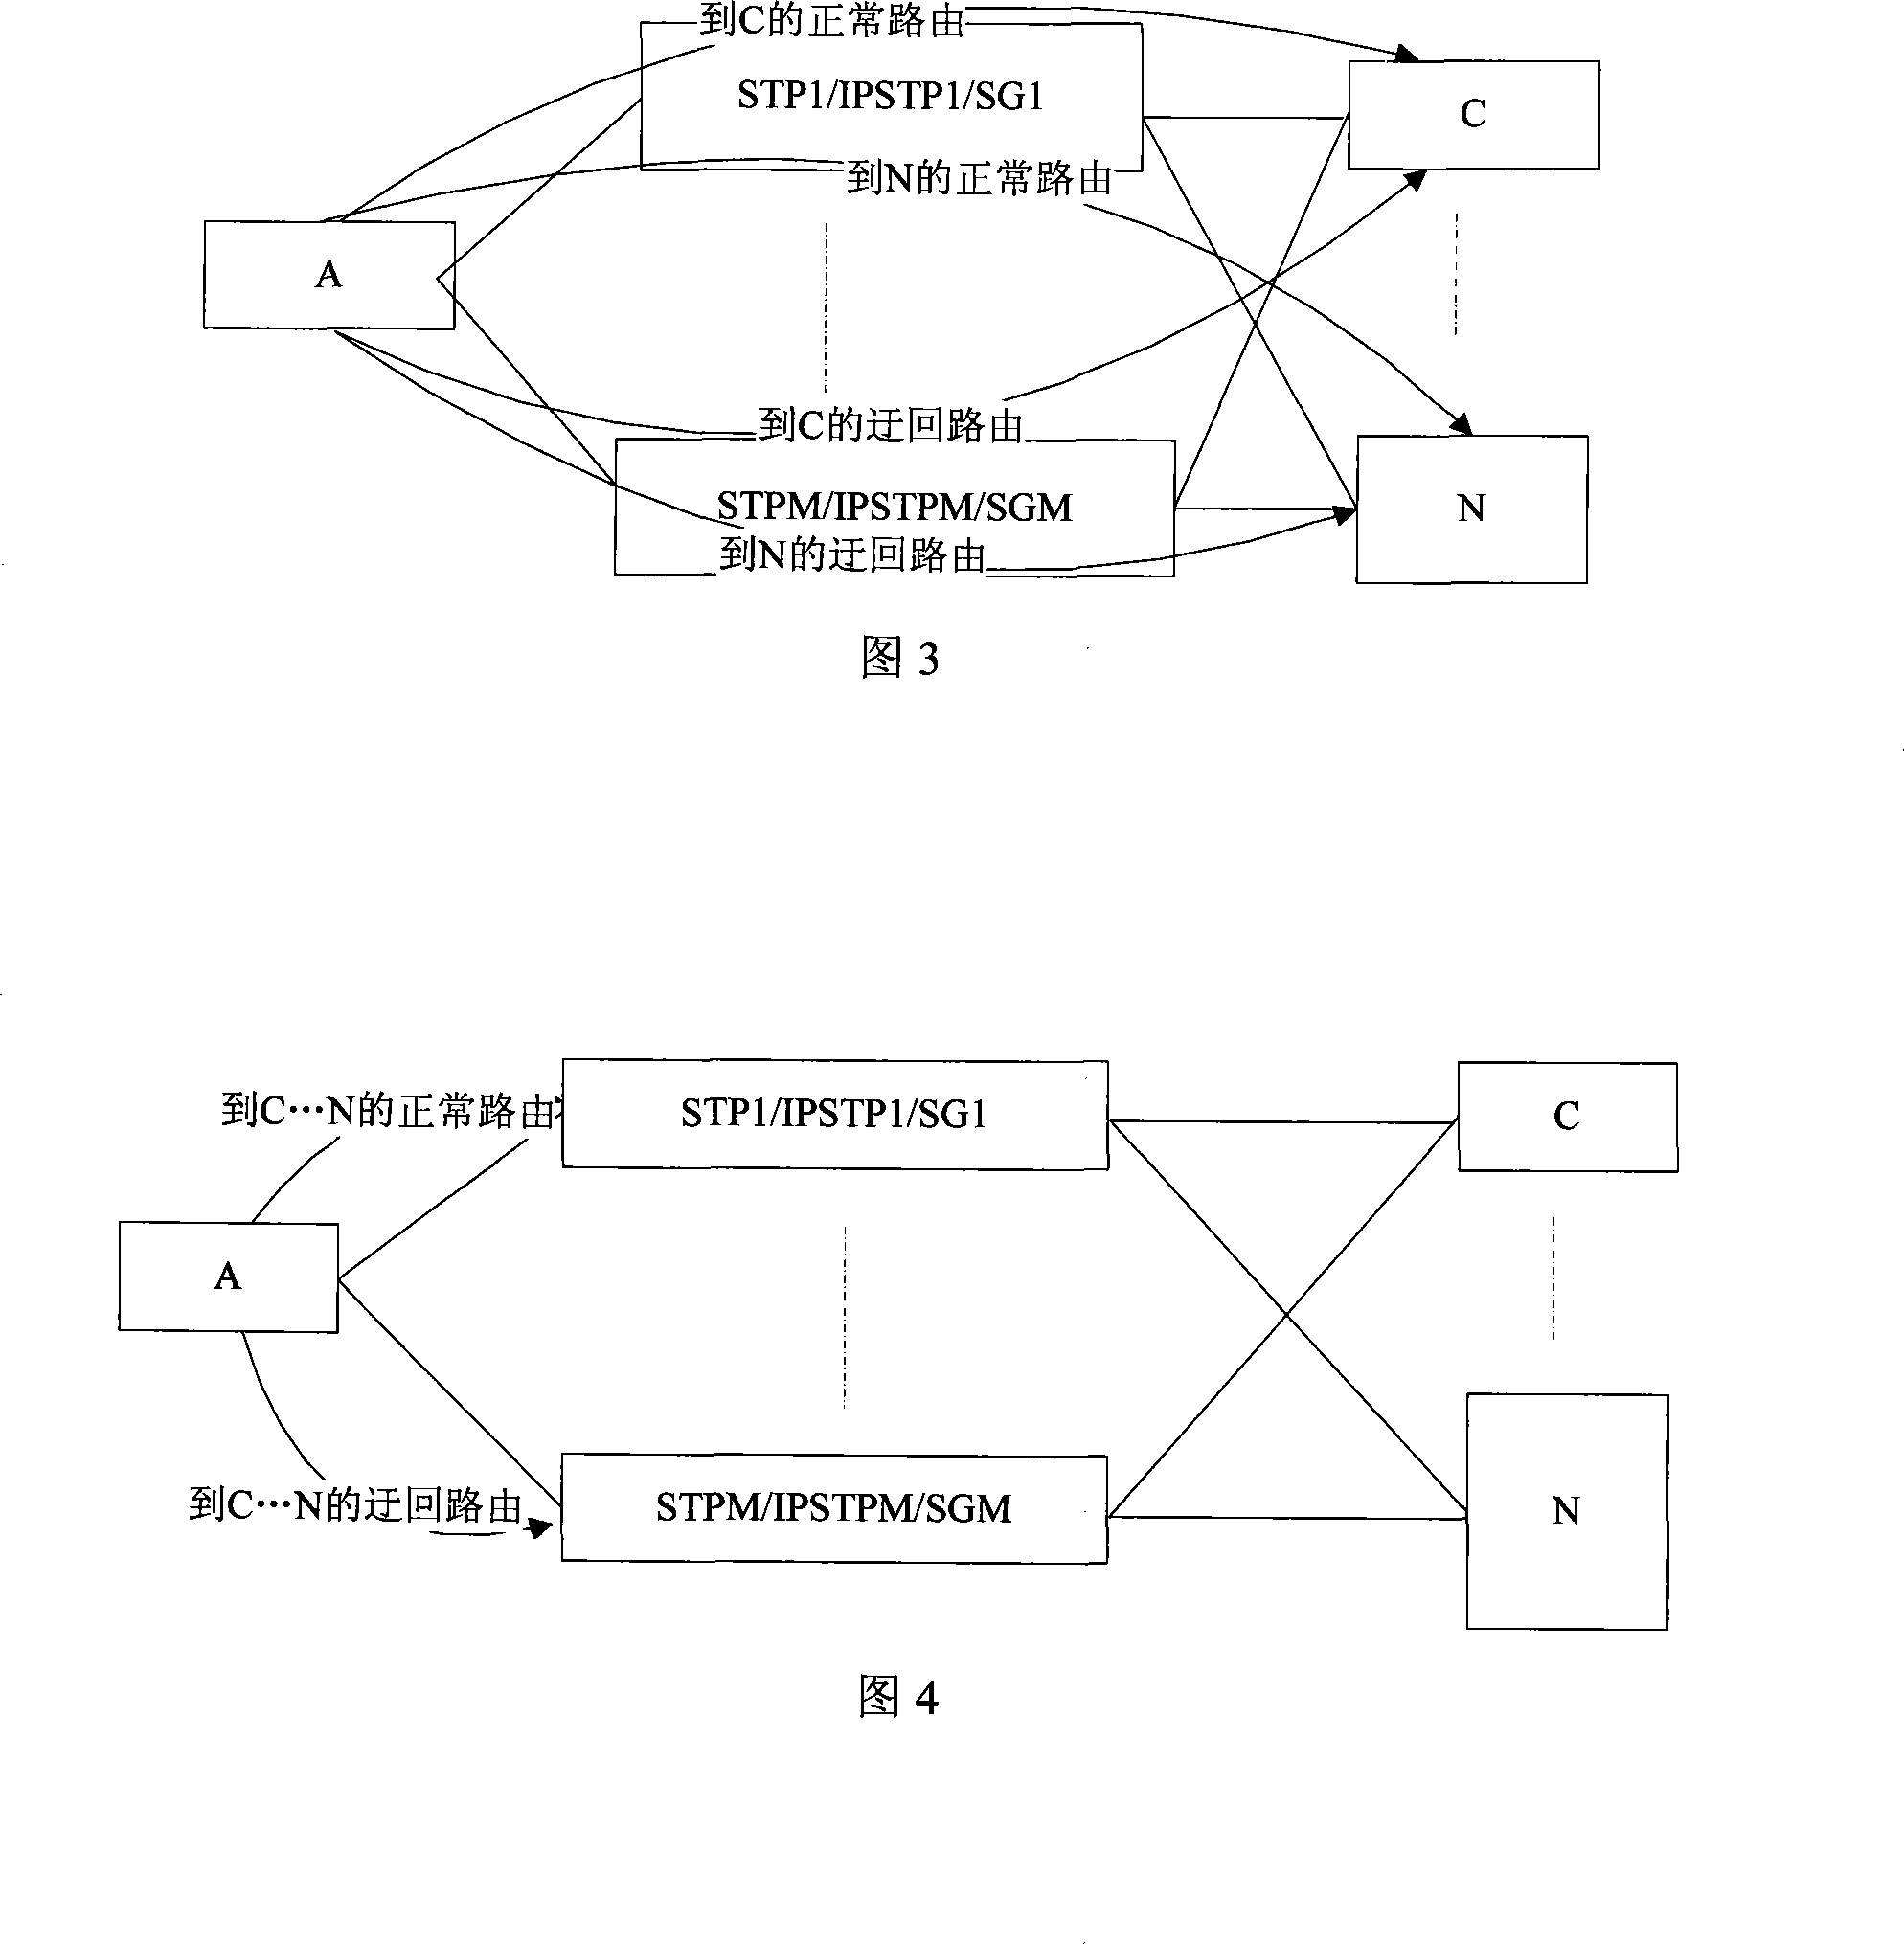 Router management method of signaling network